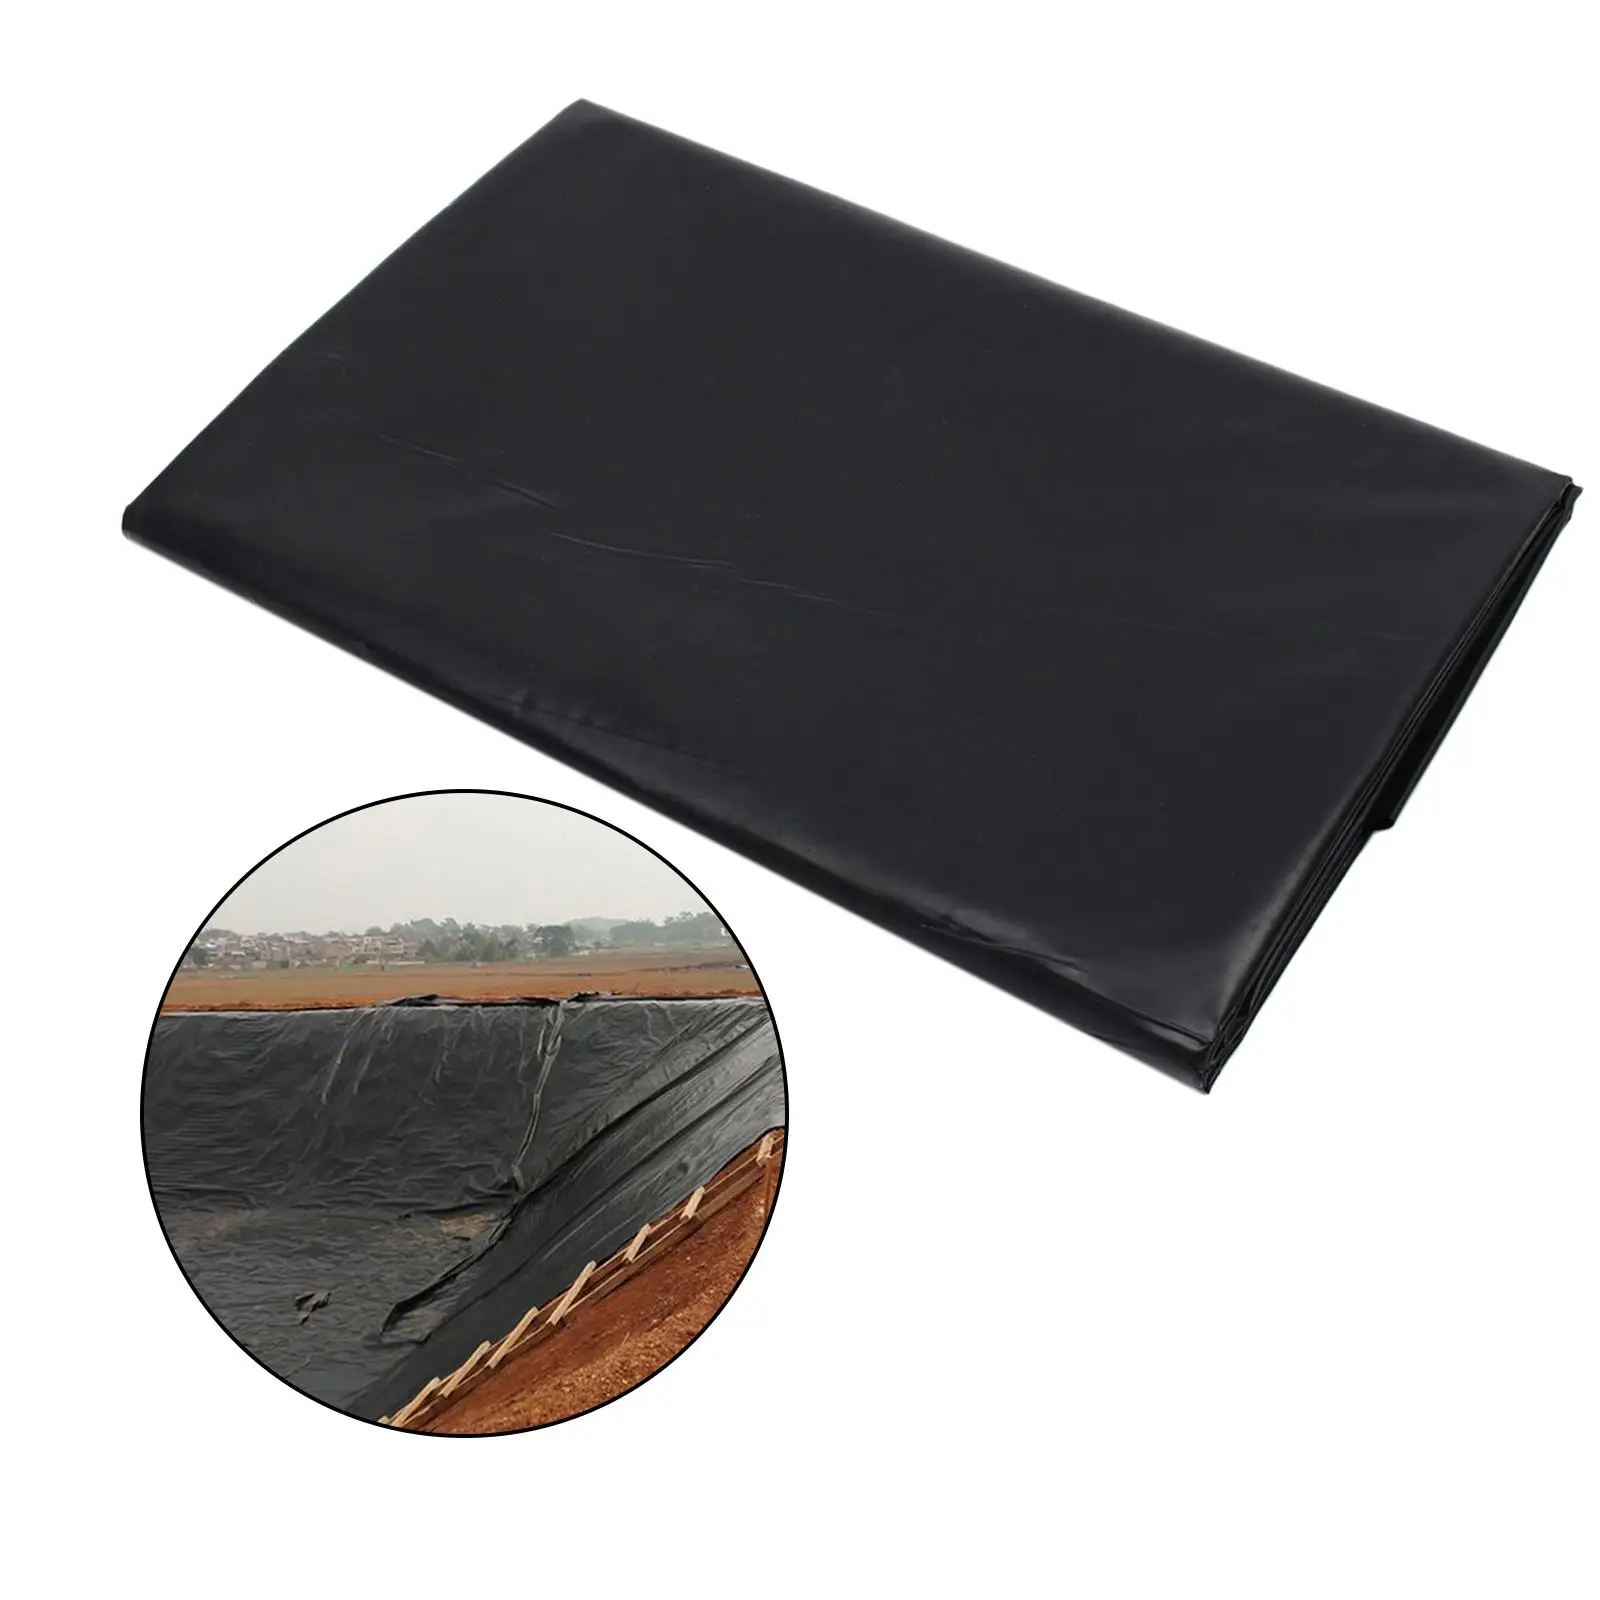 Thick Impermeable Membrane Professional Environmental Protection Pools Cover